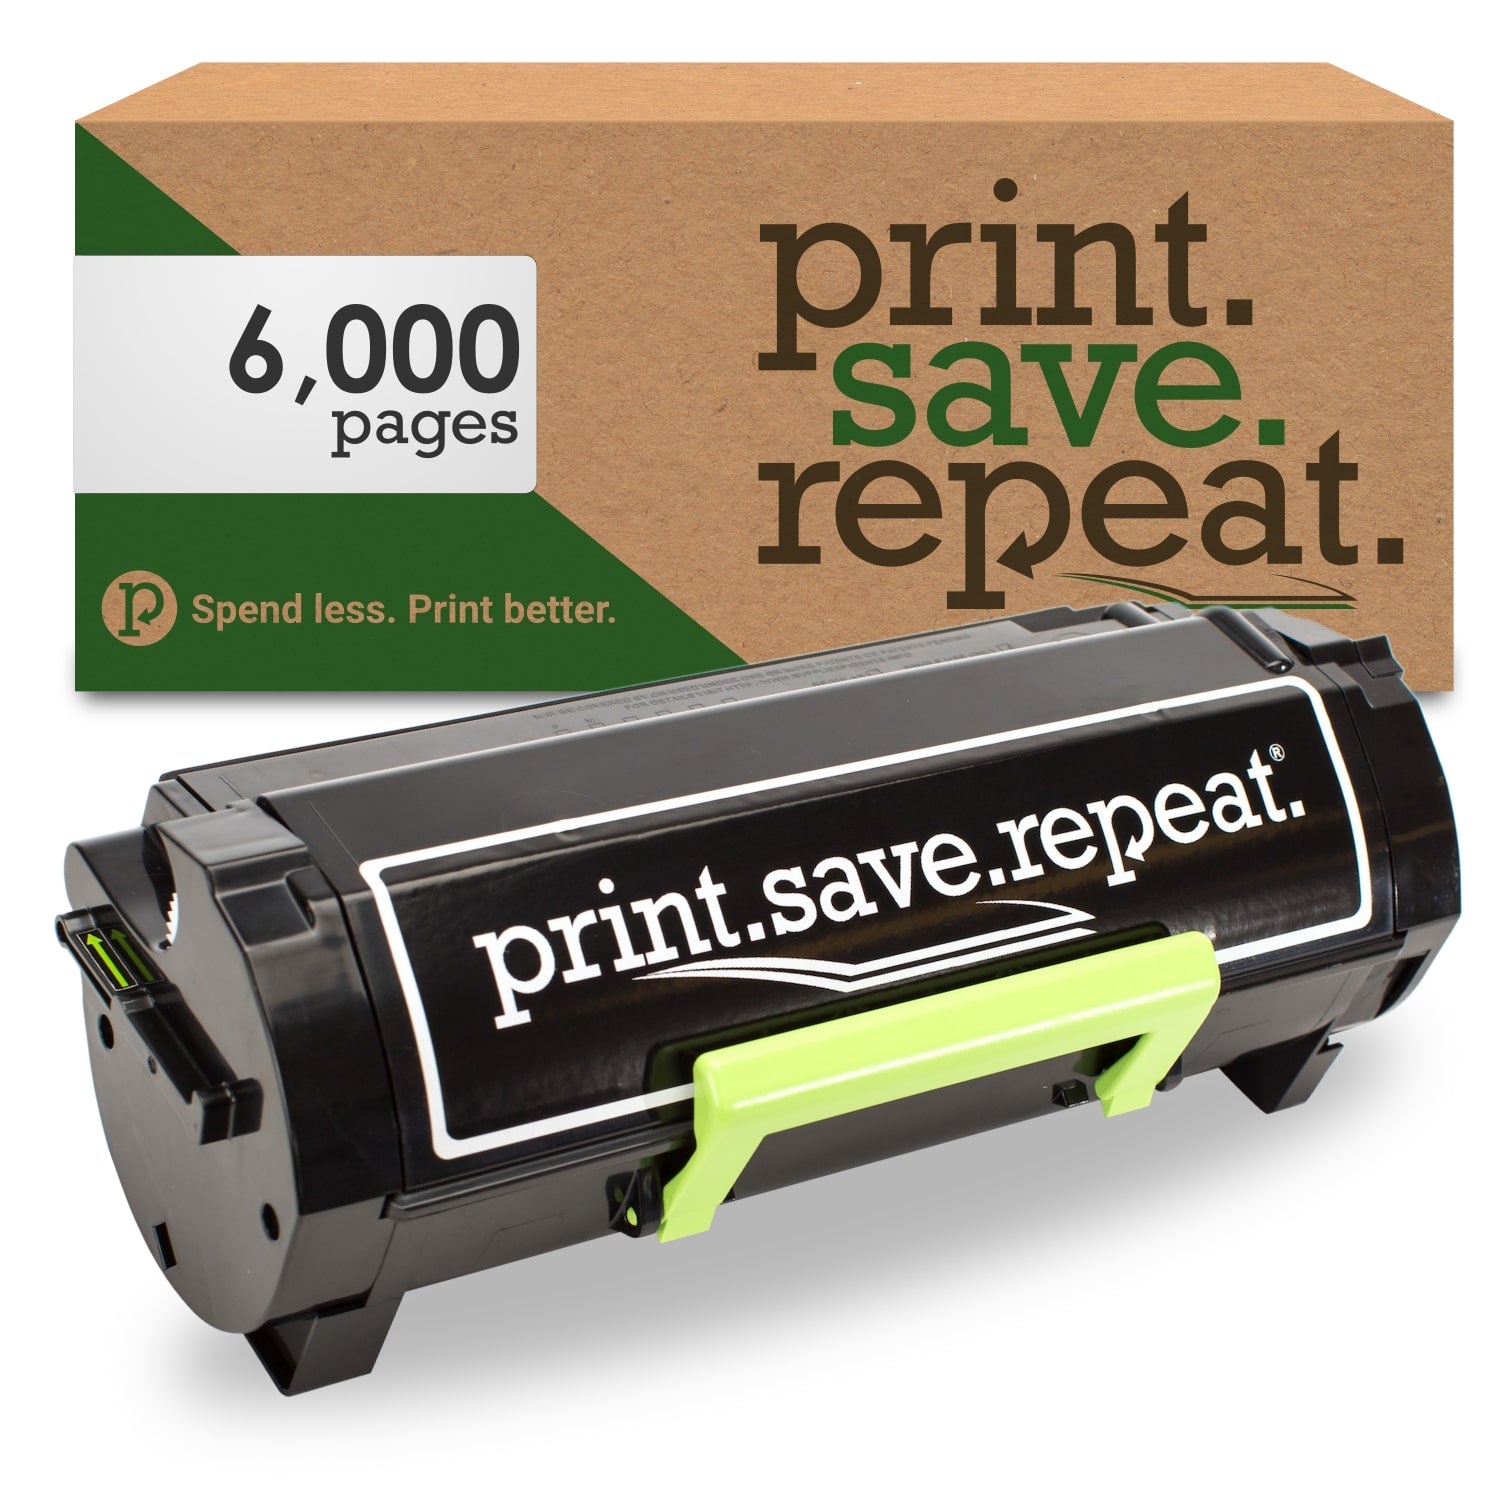 Print.Save.Repeat. Lexmark 56F1000 Standard Yield Remanufactured Toner Cartridge for MS321, MS421, MS521, MS621, MS622, MX321, MX421, MX521, MX522, MX622 [6,000 Pages]